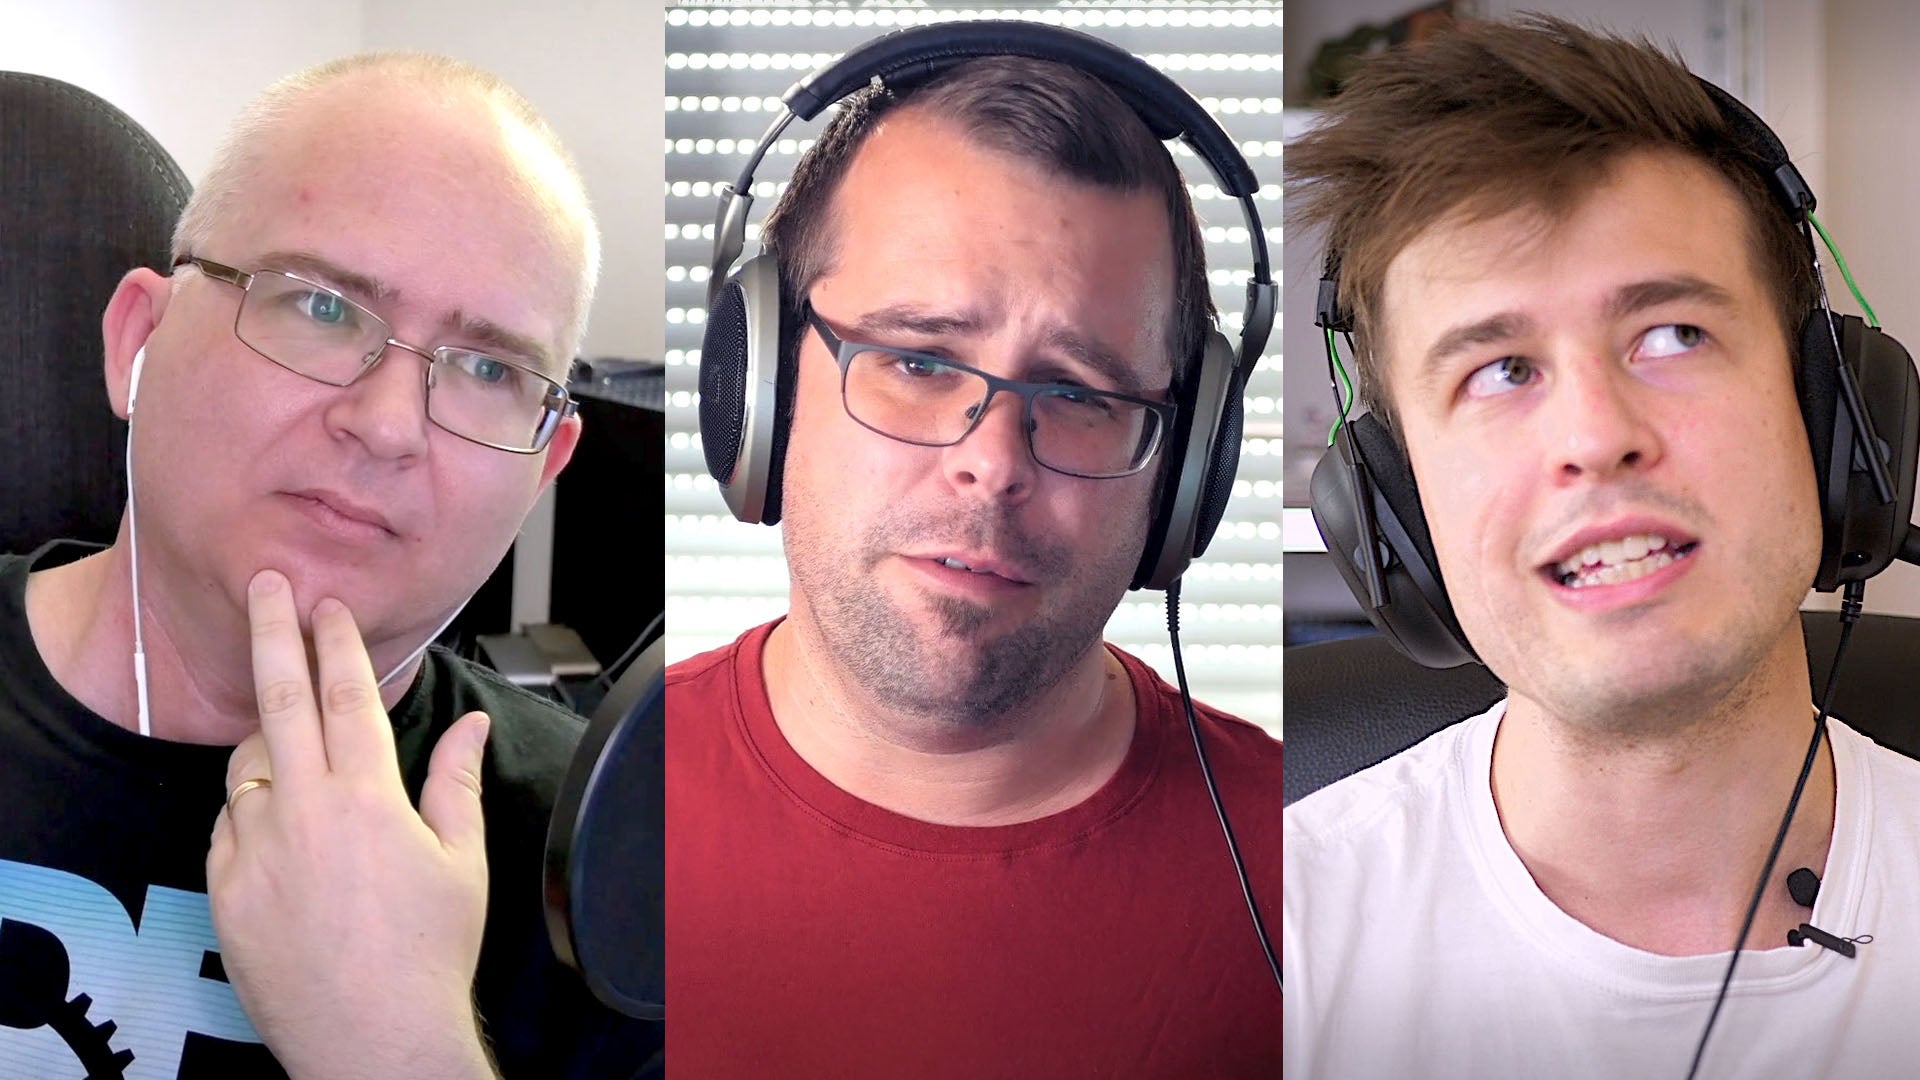 digital foundry weekly 72, with rich, john and alex pictured